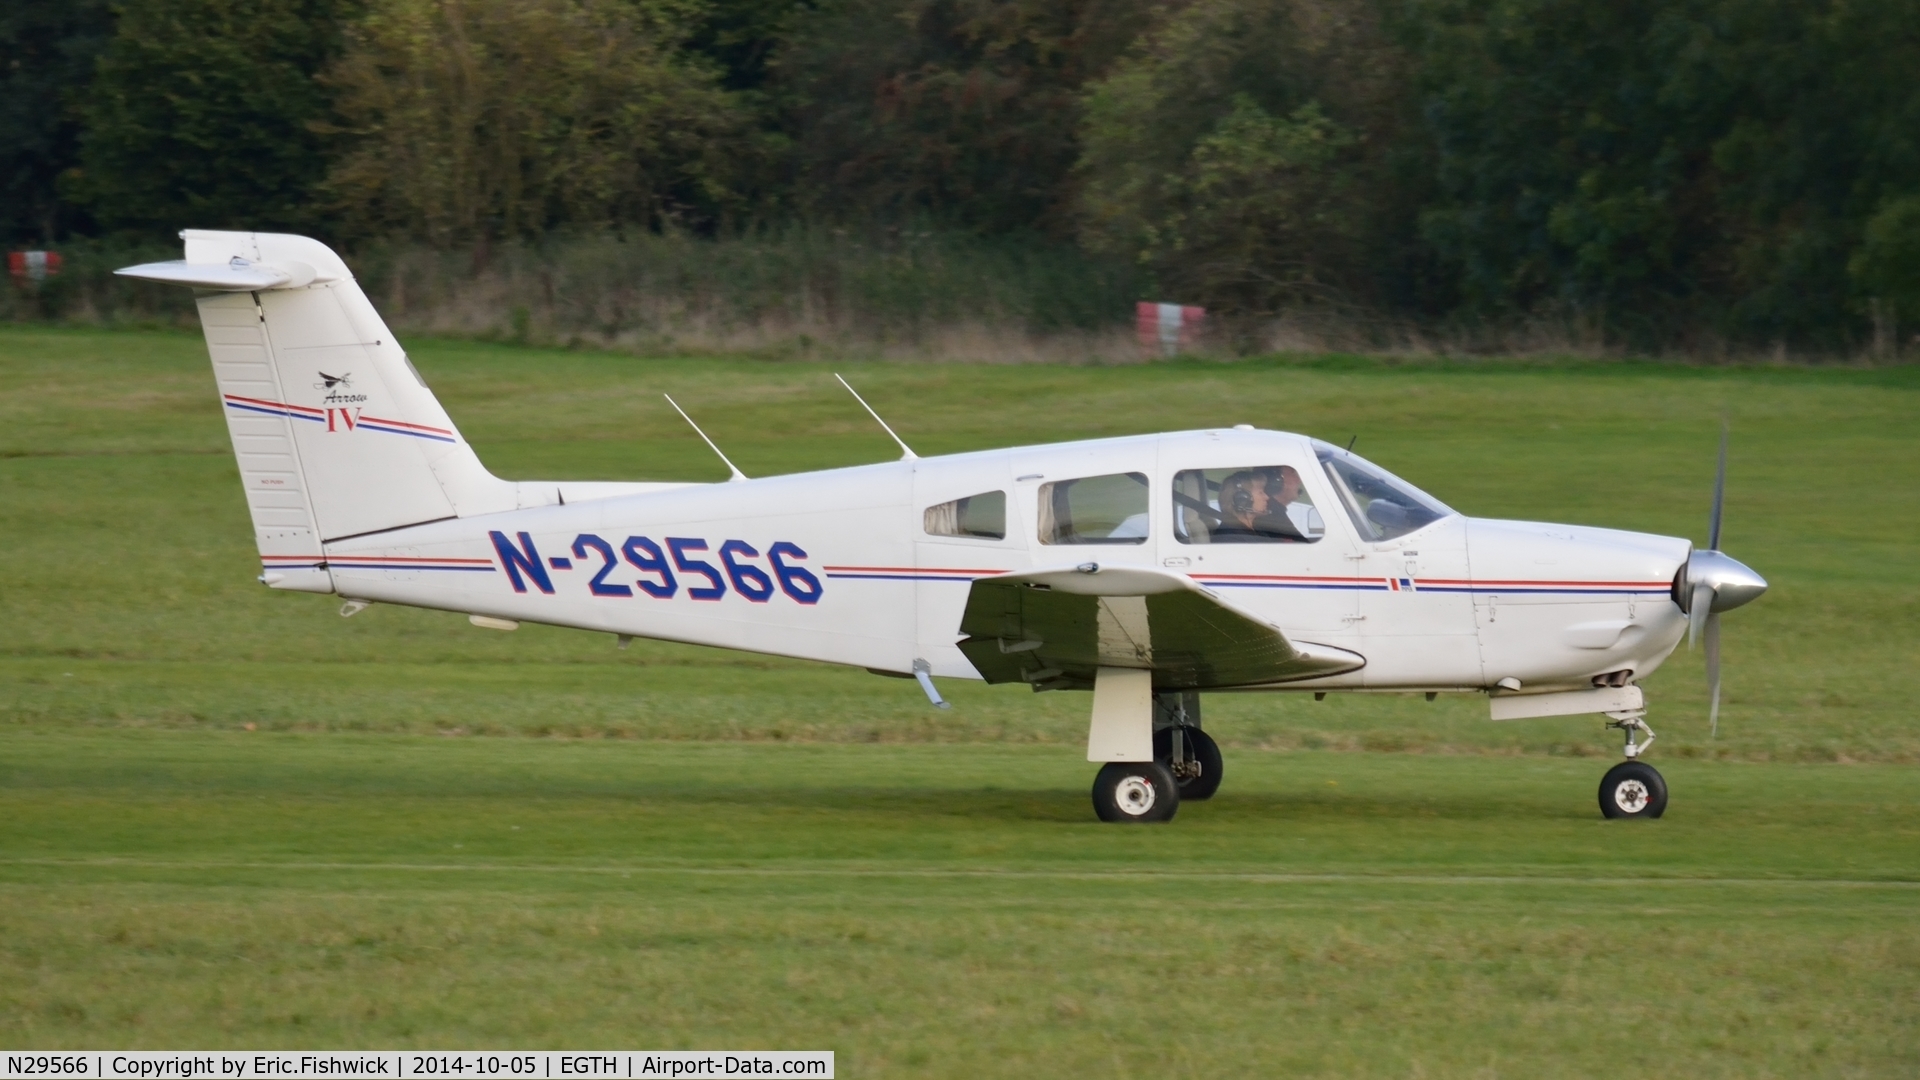 N29566, 1979 Piper PA-28RT-201 Arrow IV C/N 28R-7918146, 2. N29566 preparing to depart the rousing season finale Race Day Air Show at Shuttleworth, Oct. 2014.